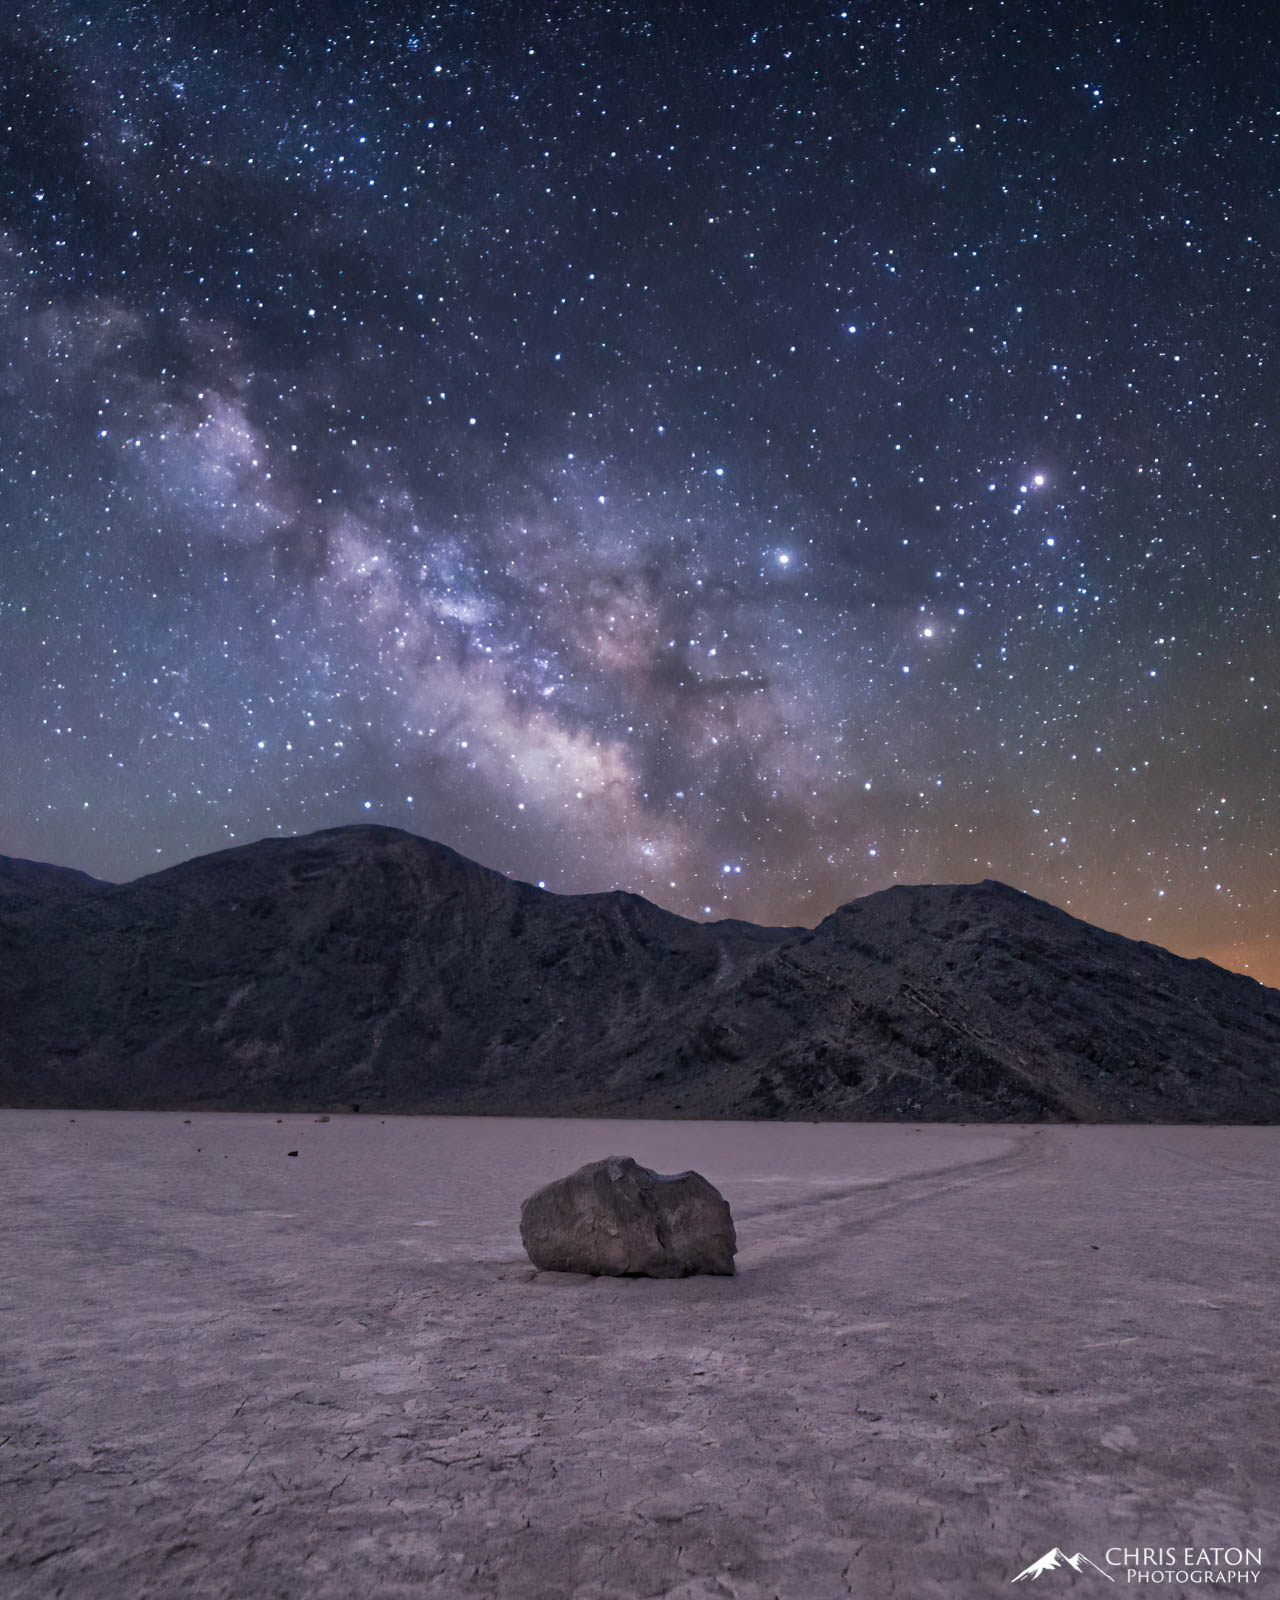 The Milky Way galaxy over The Racetrack playa in Death Valley National Park.